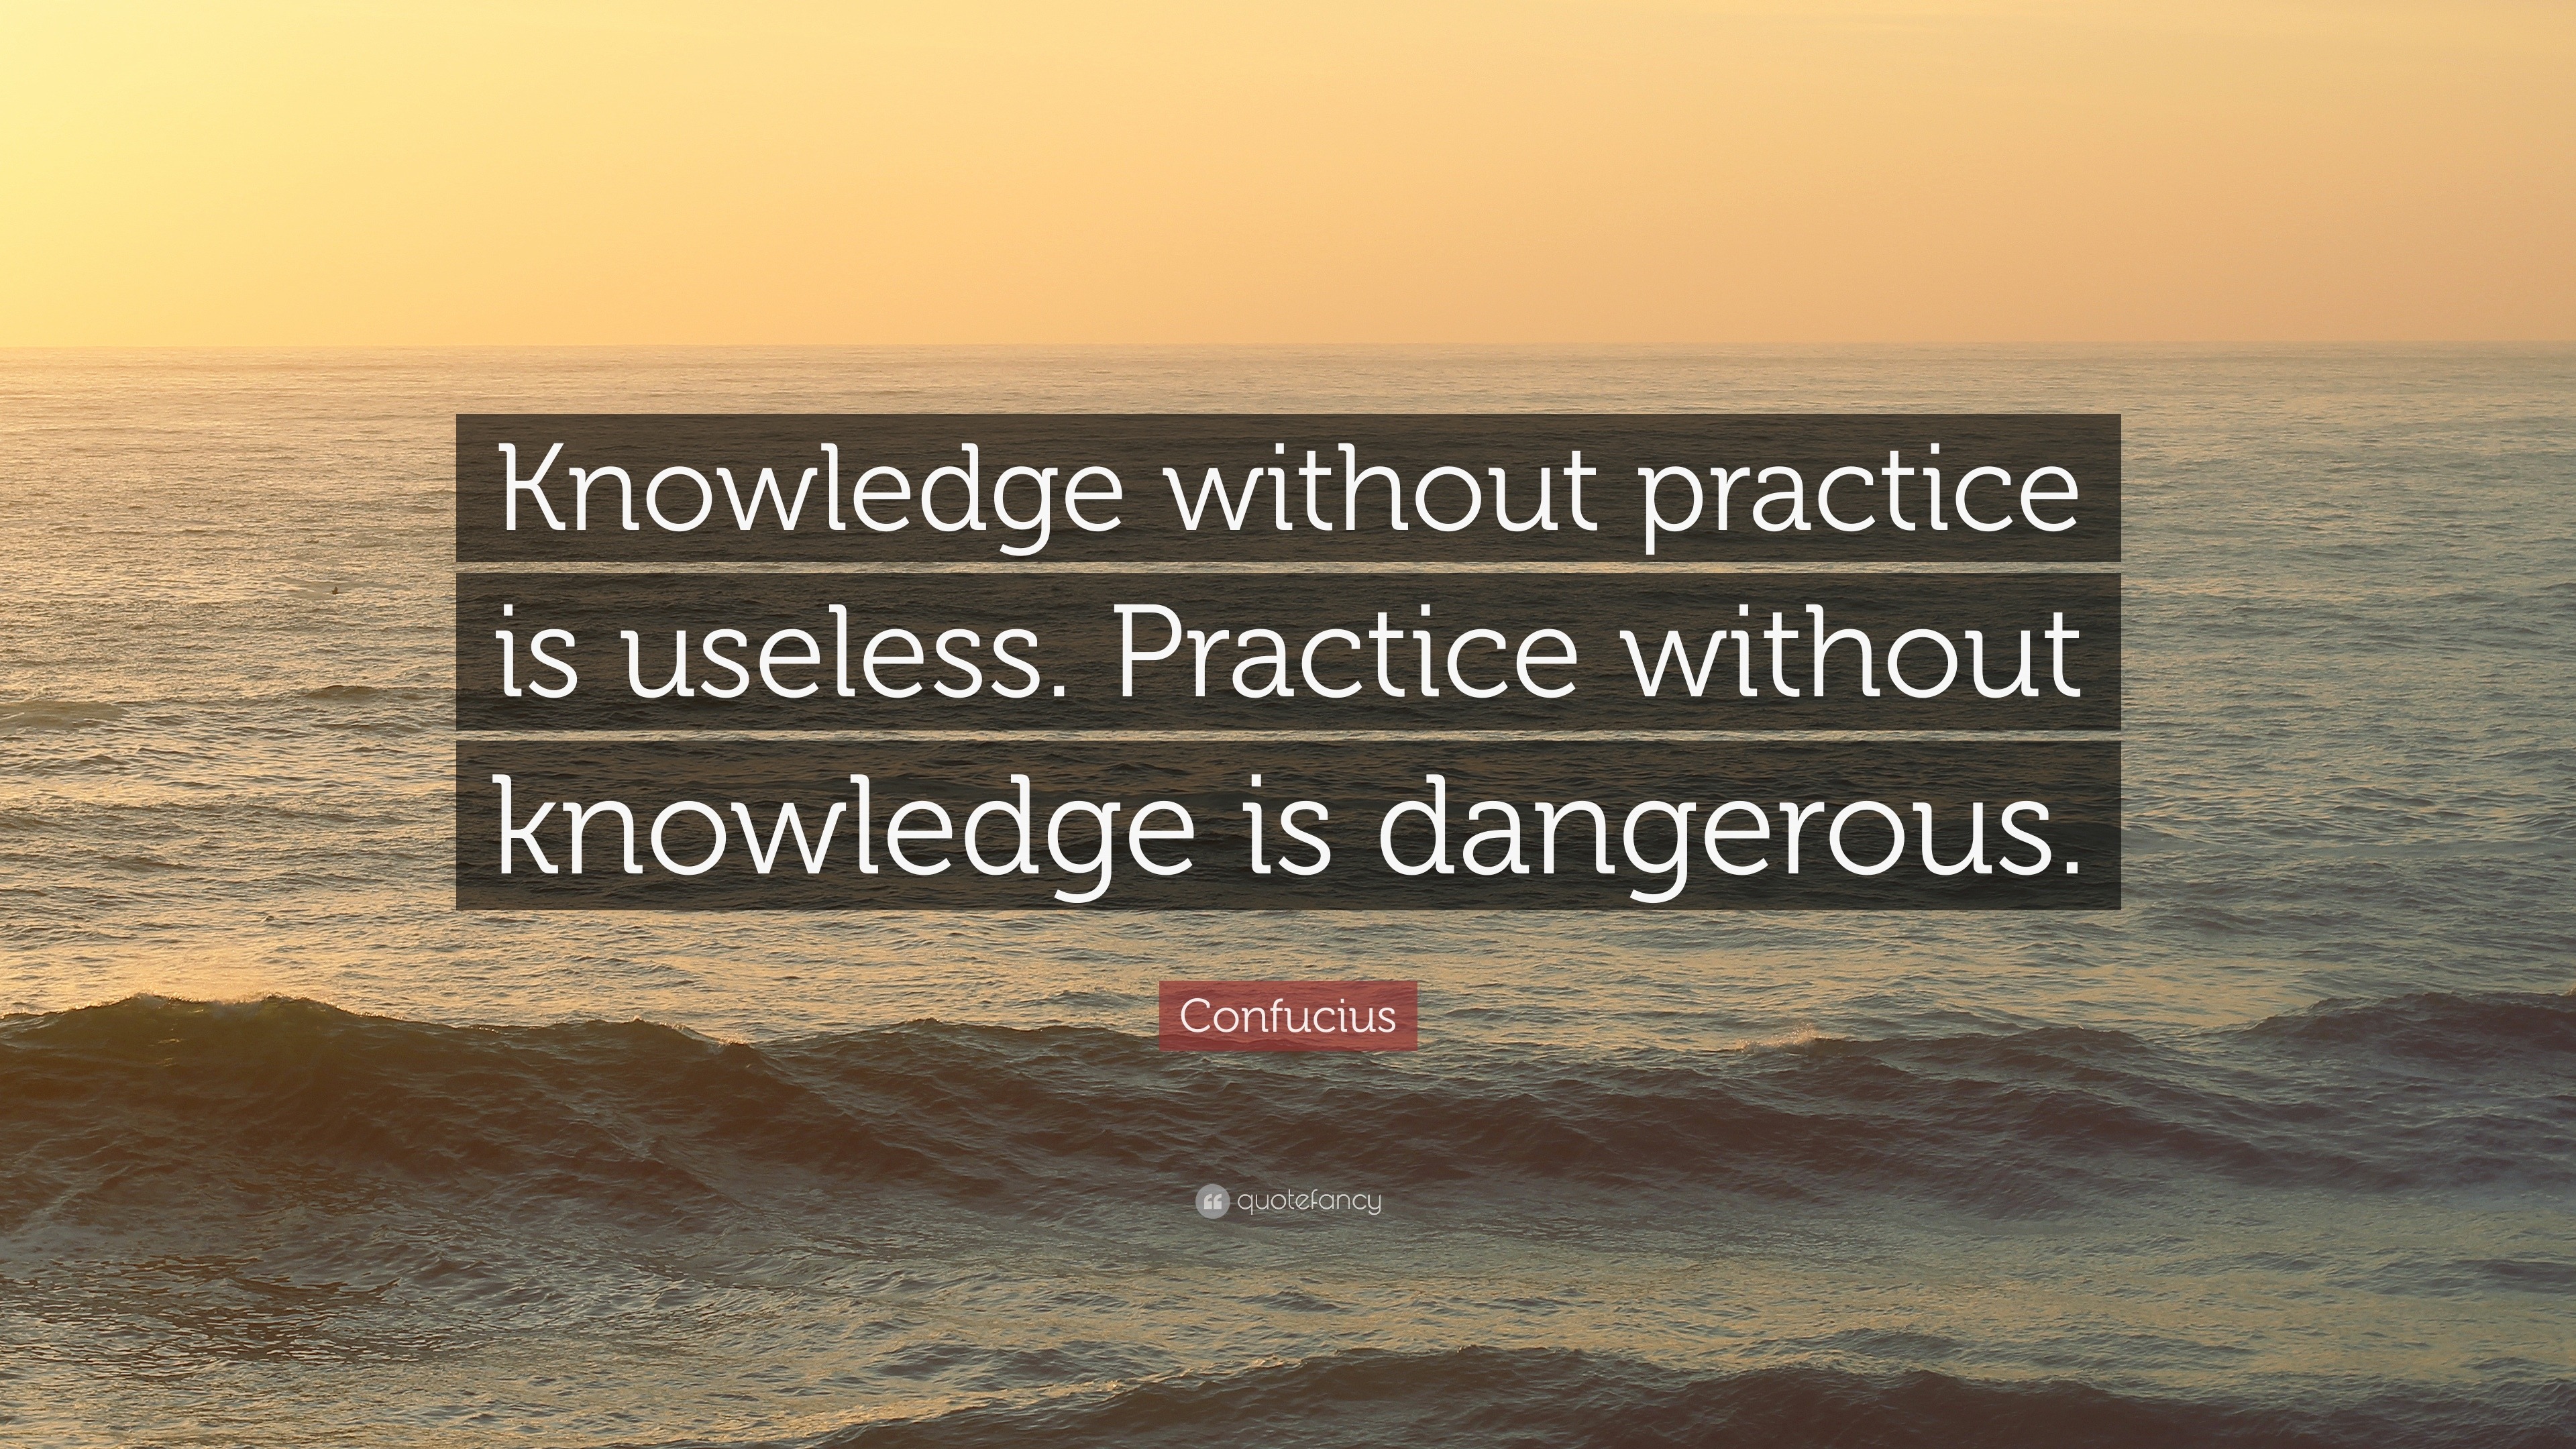 Confucius Quote “Knowledge without practice is useless